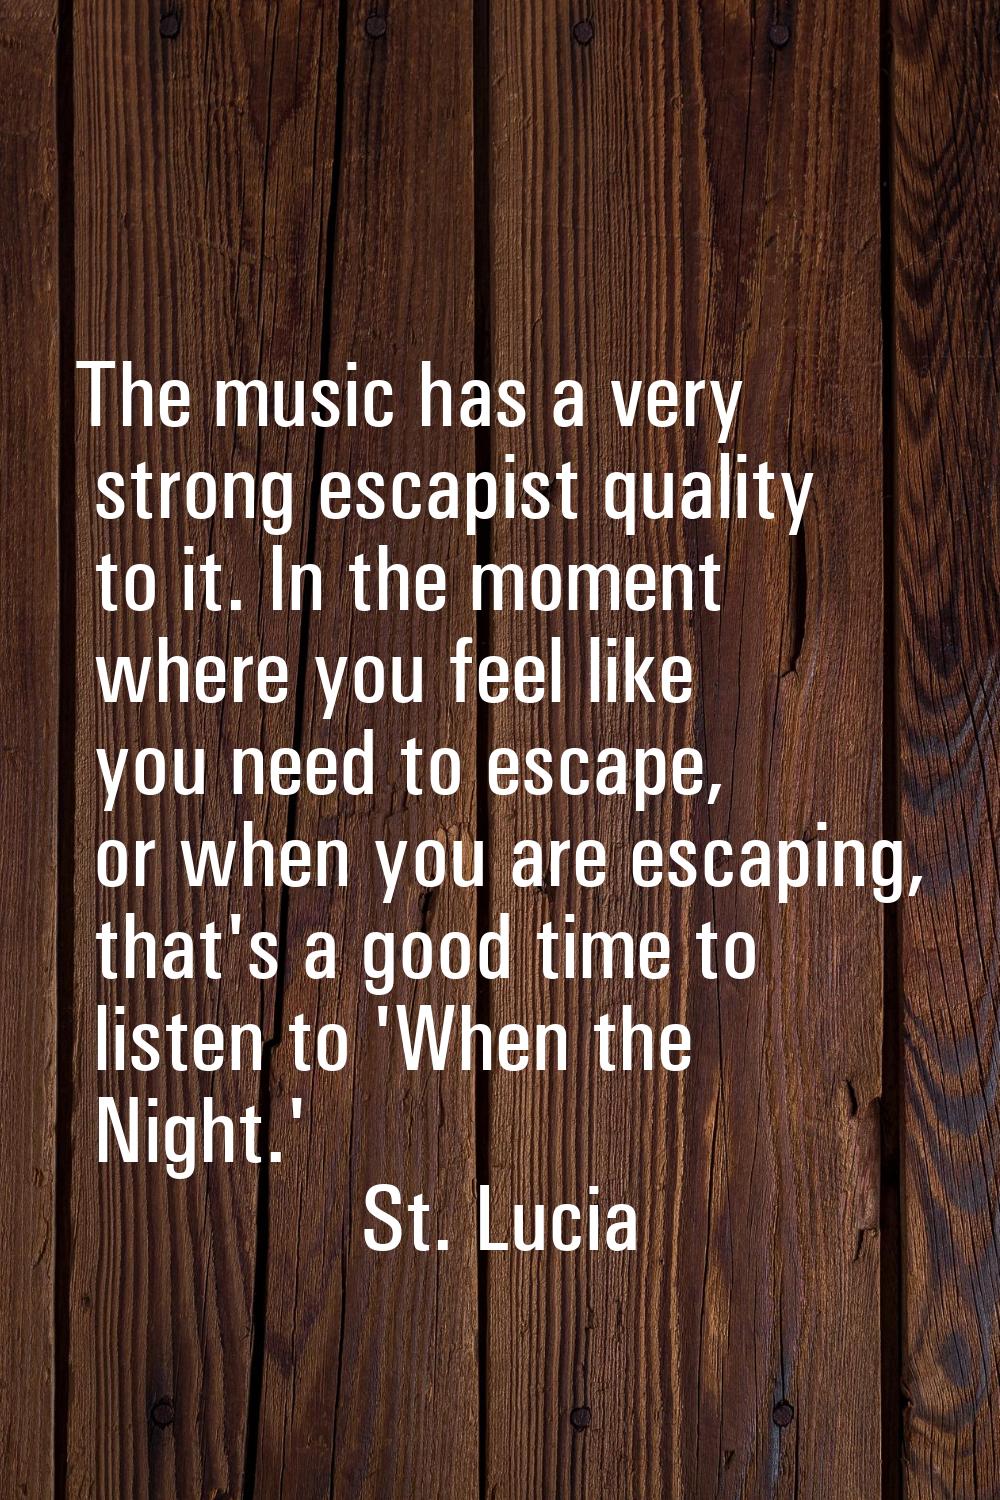 The music has a very strong escapist quality to it. In the moment where you feel like you need to e